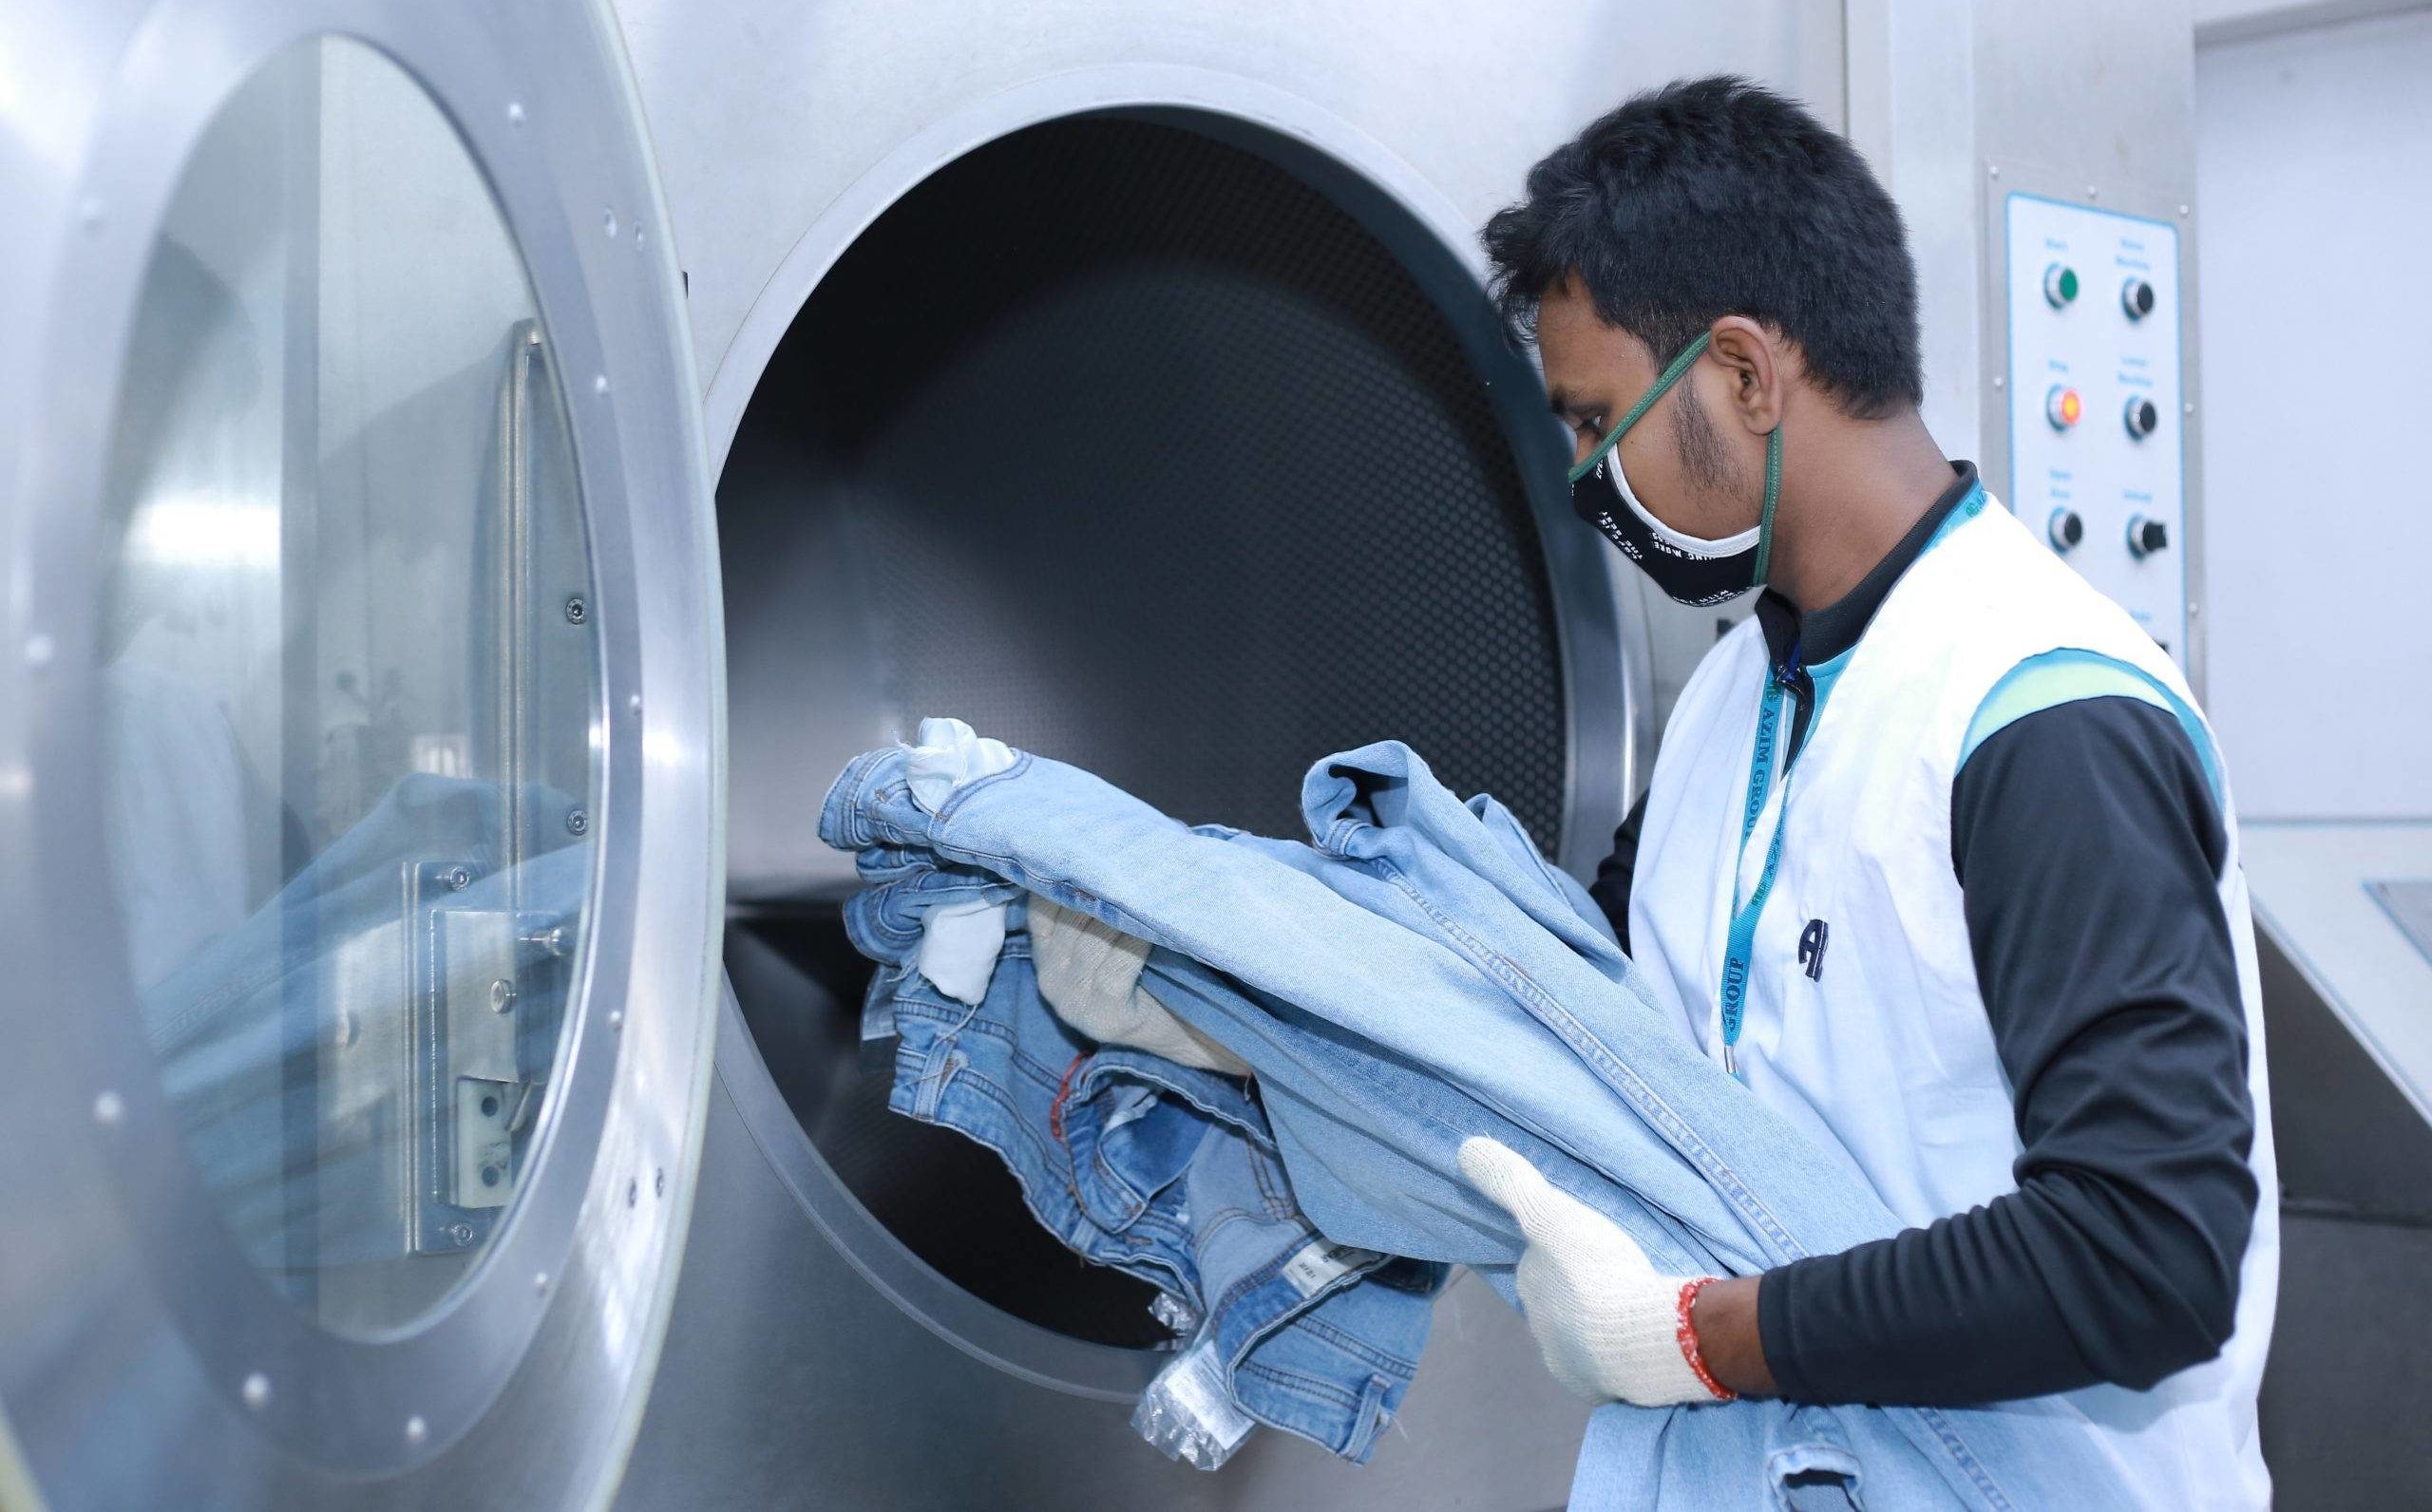 Garment factory worker putting denim jeans inside an industrial washing machine for laundry